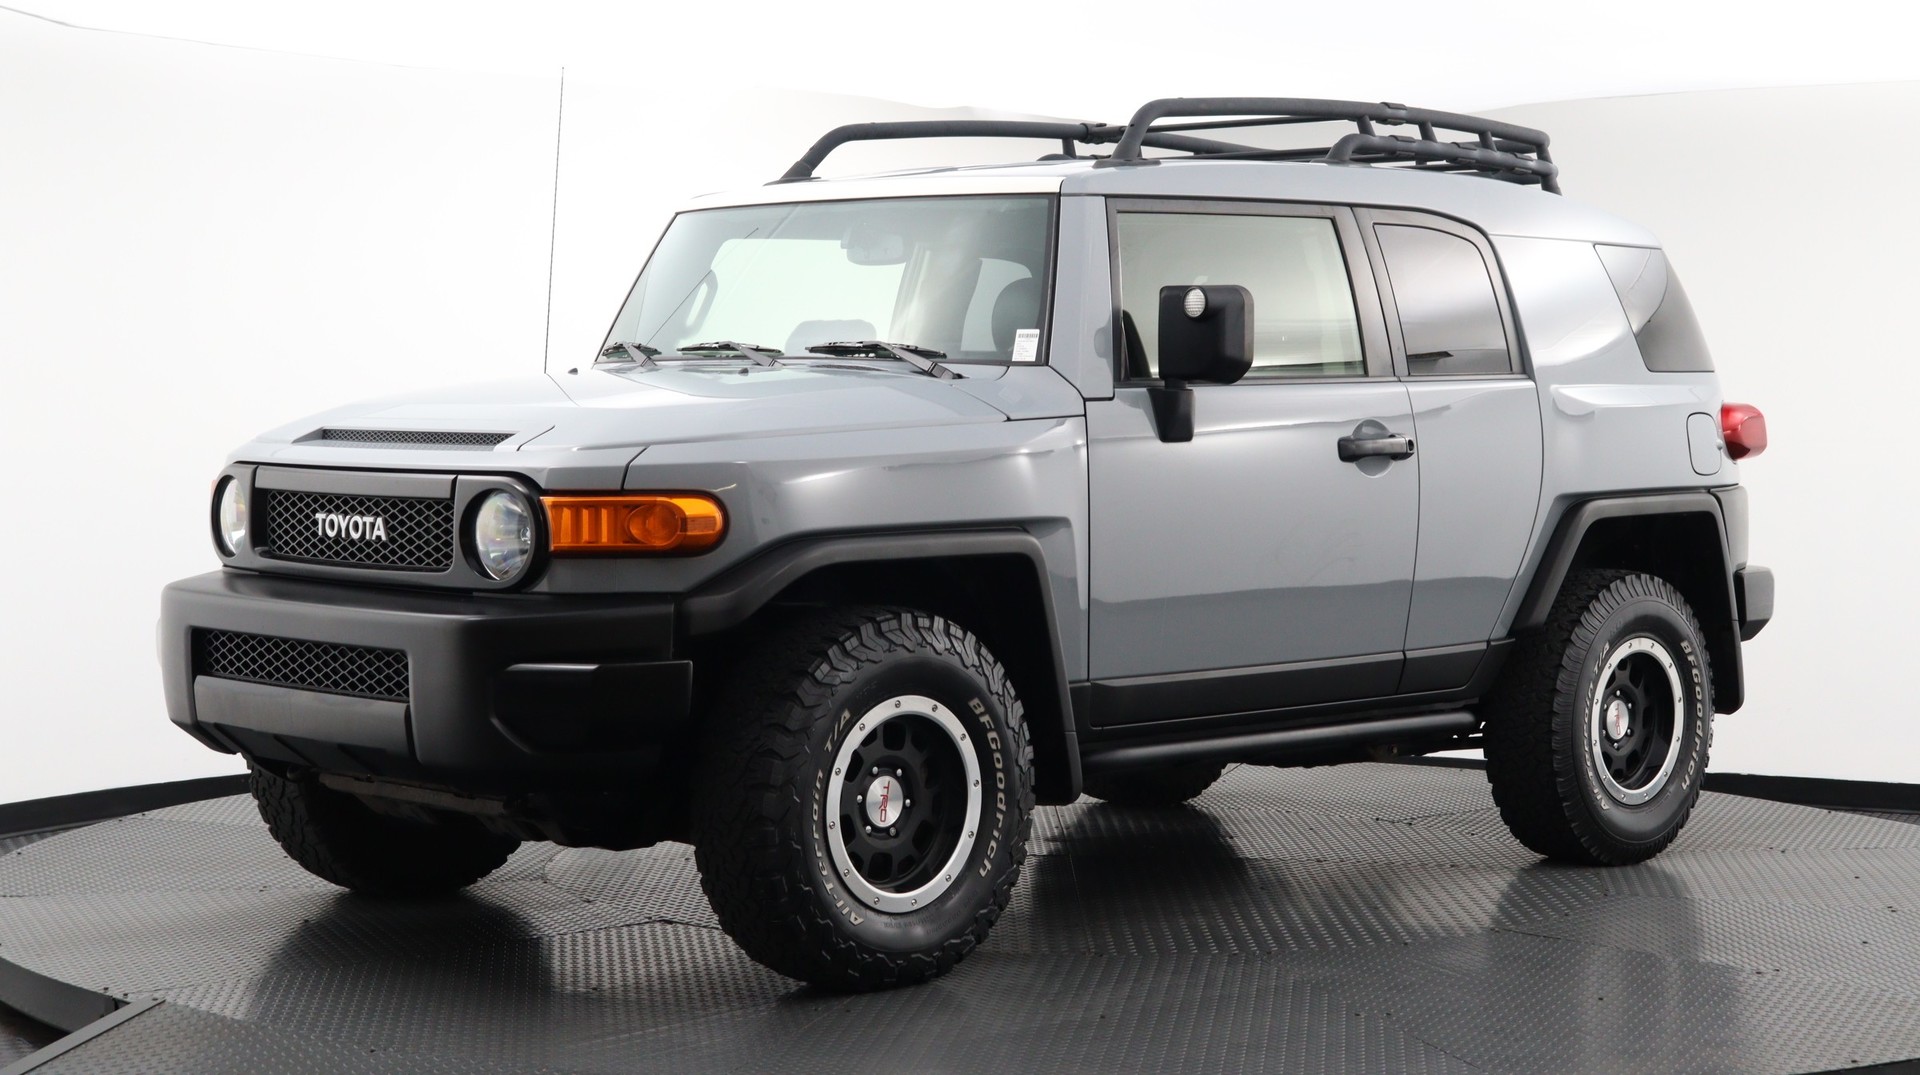 Used 2013 TOYOTA FJ CRUISER TRAIL TEAMS SPECIAL EDITION for sale in WEST  PALM | 124360